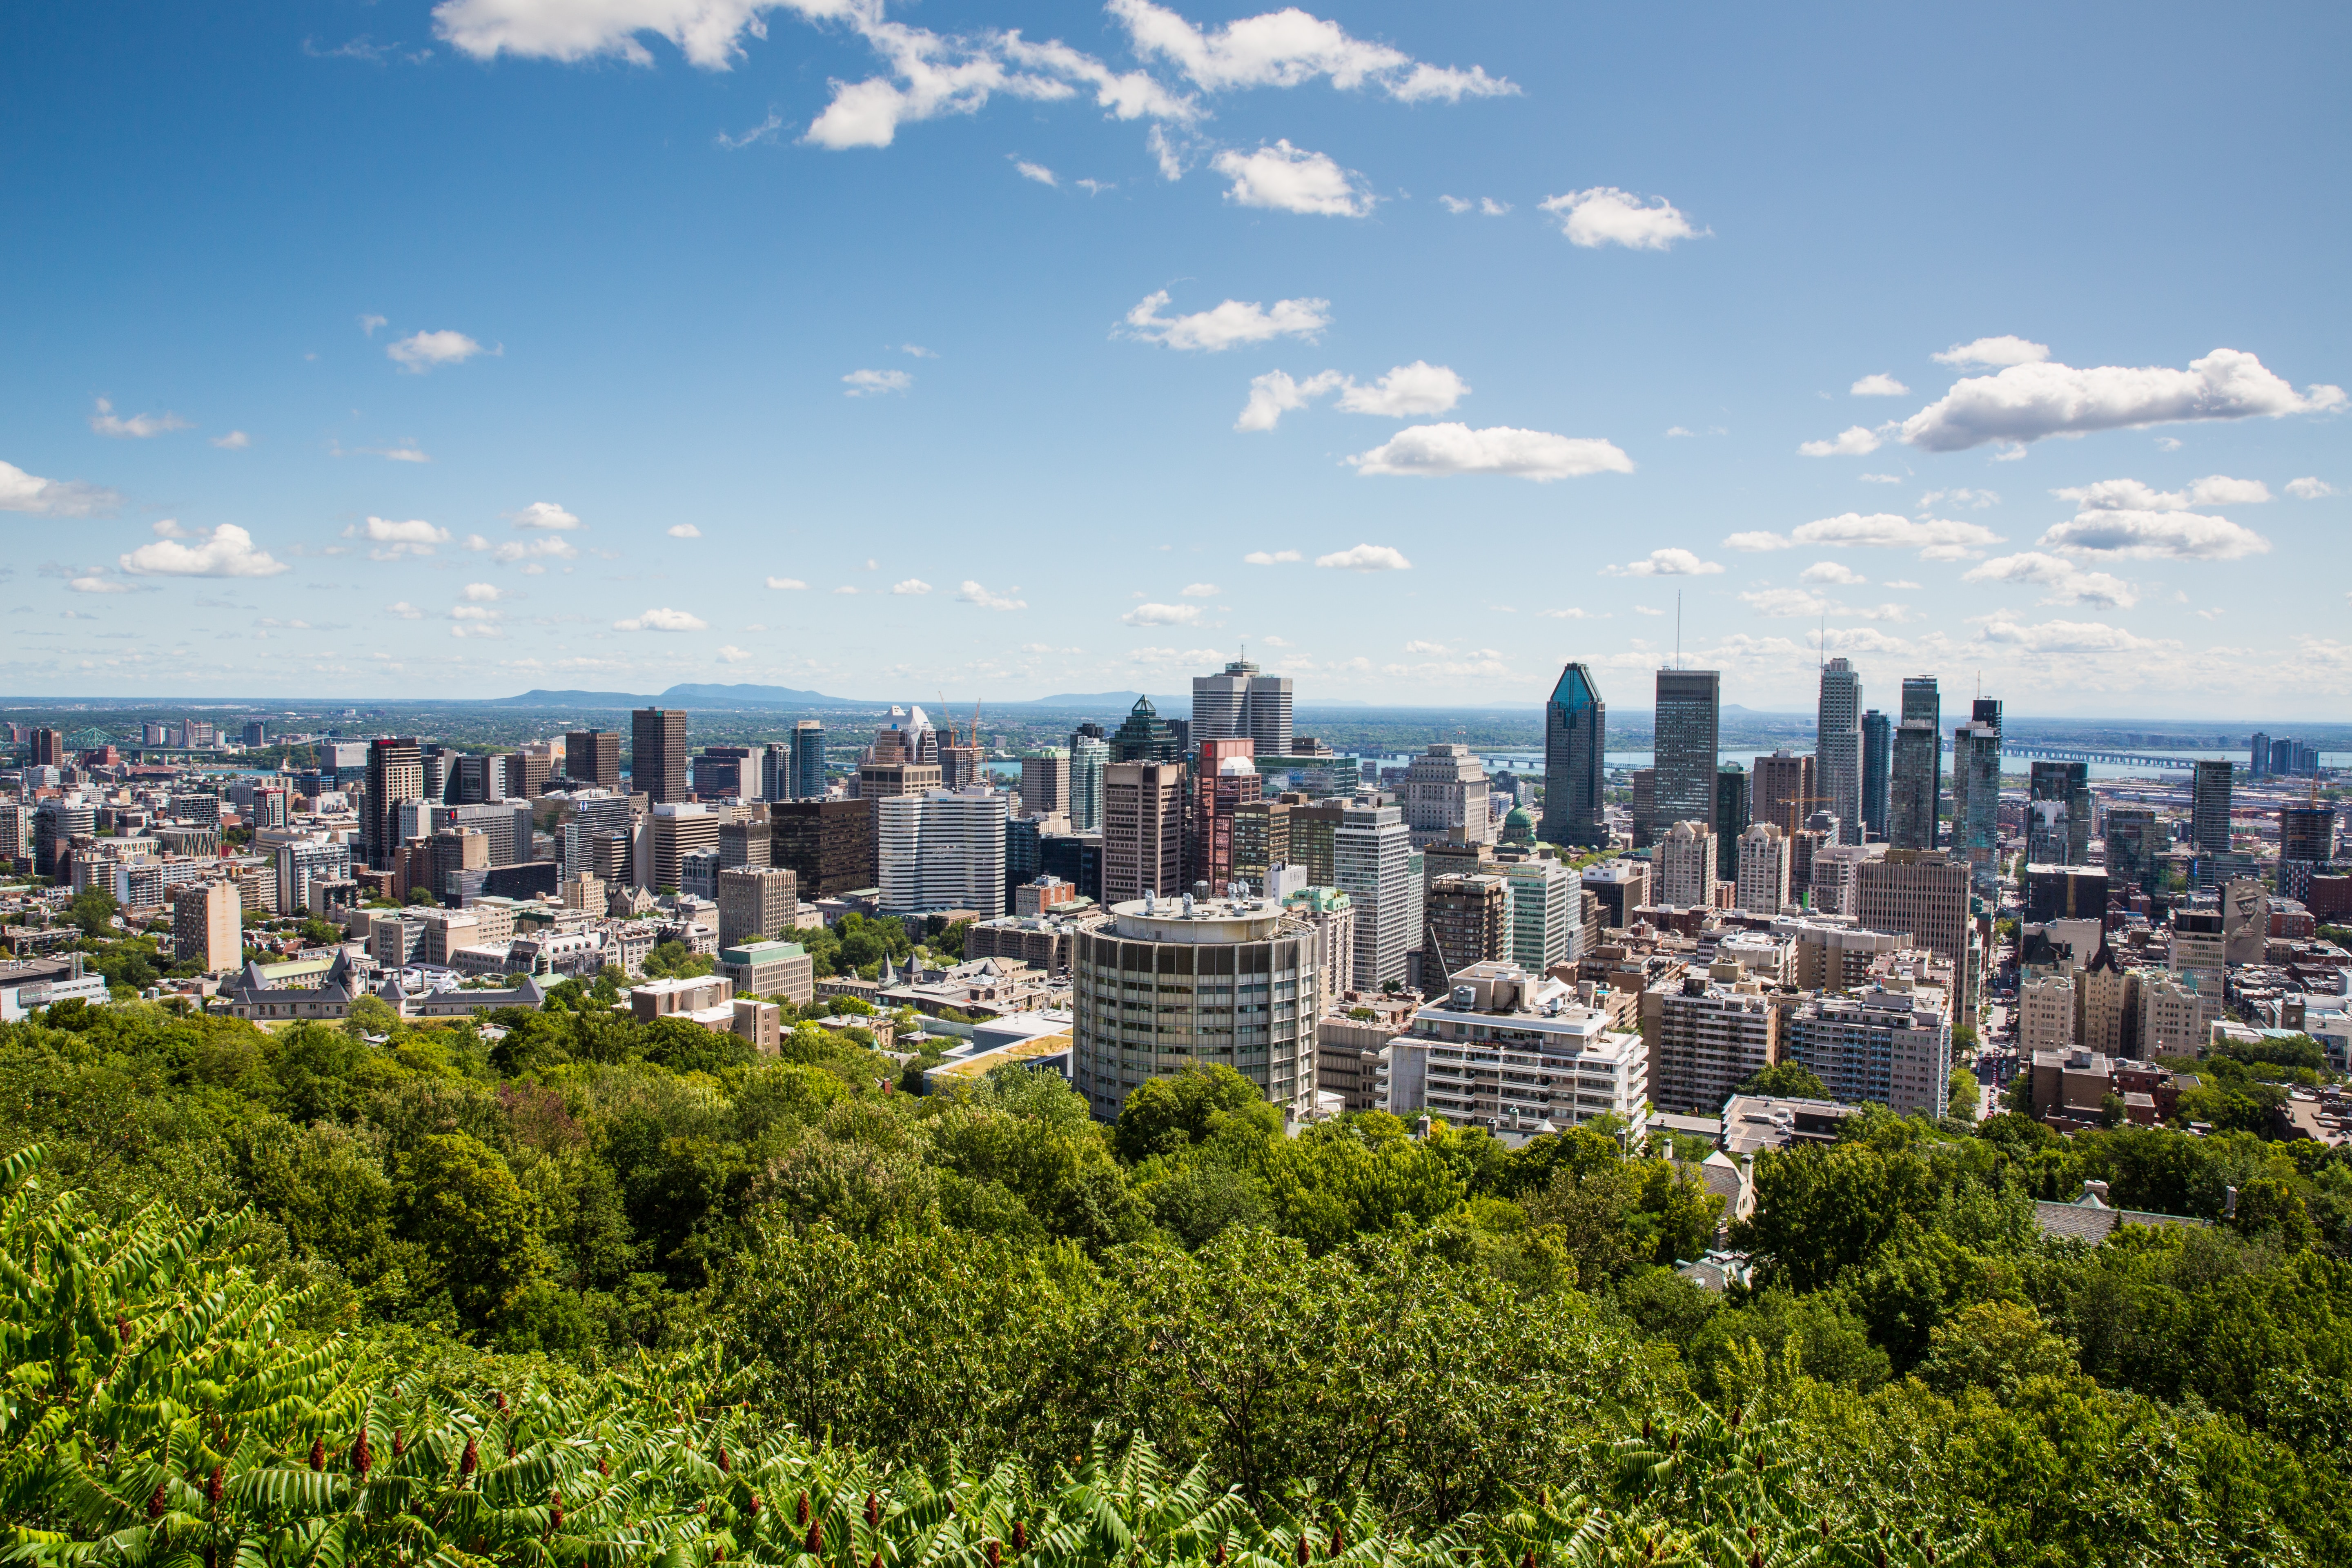 The skyline of Montreal Canada